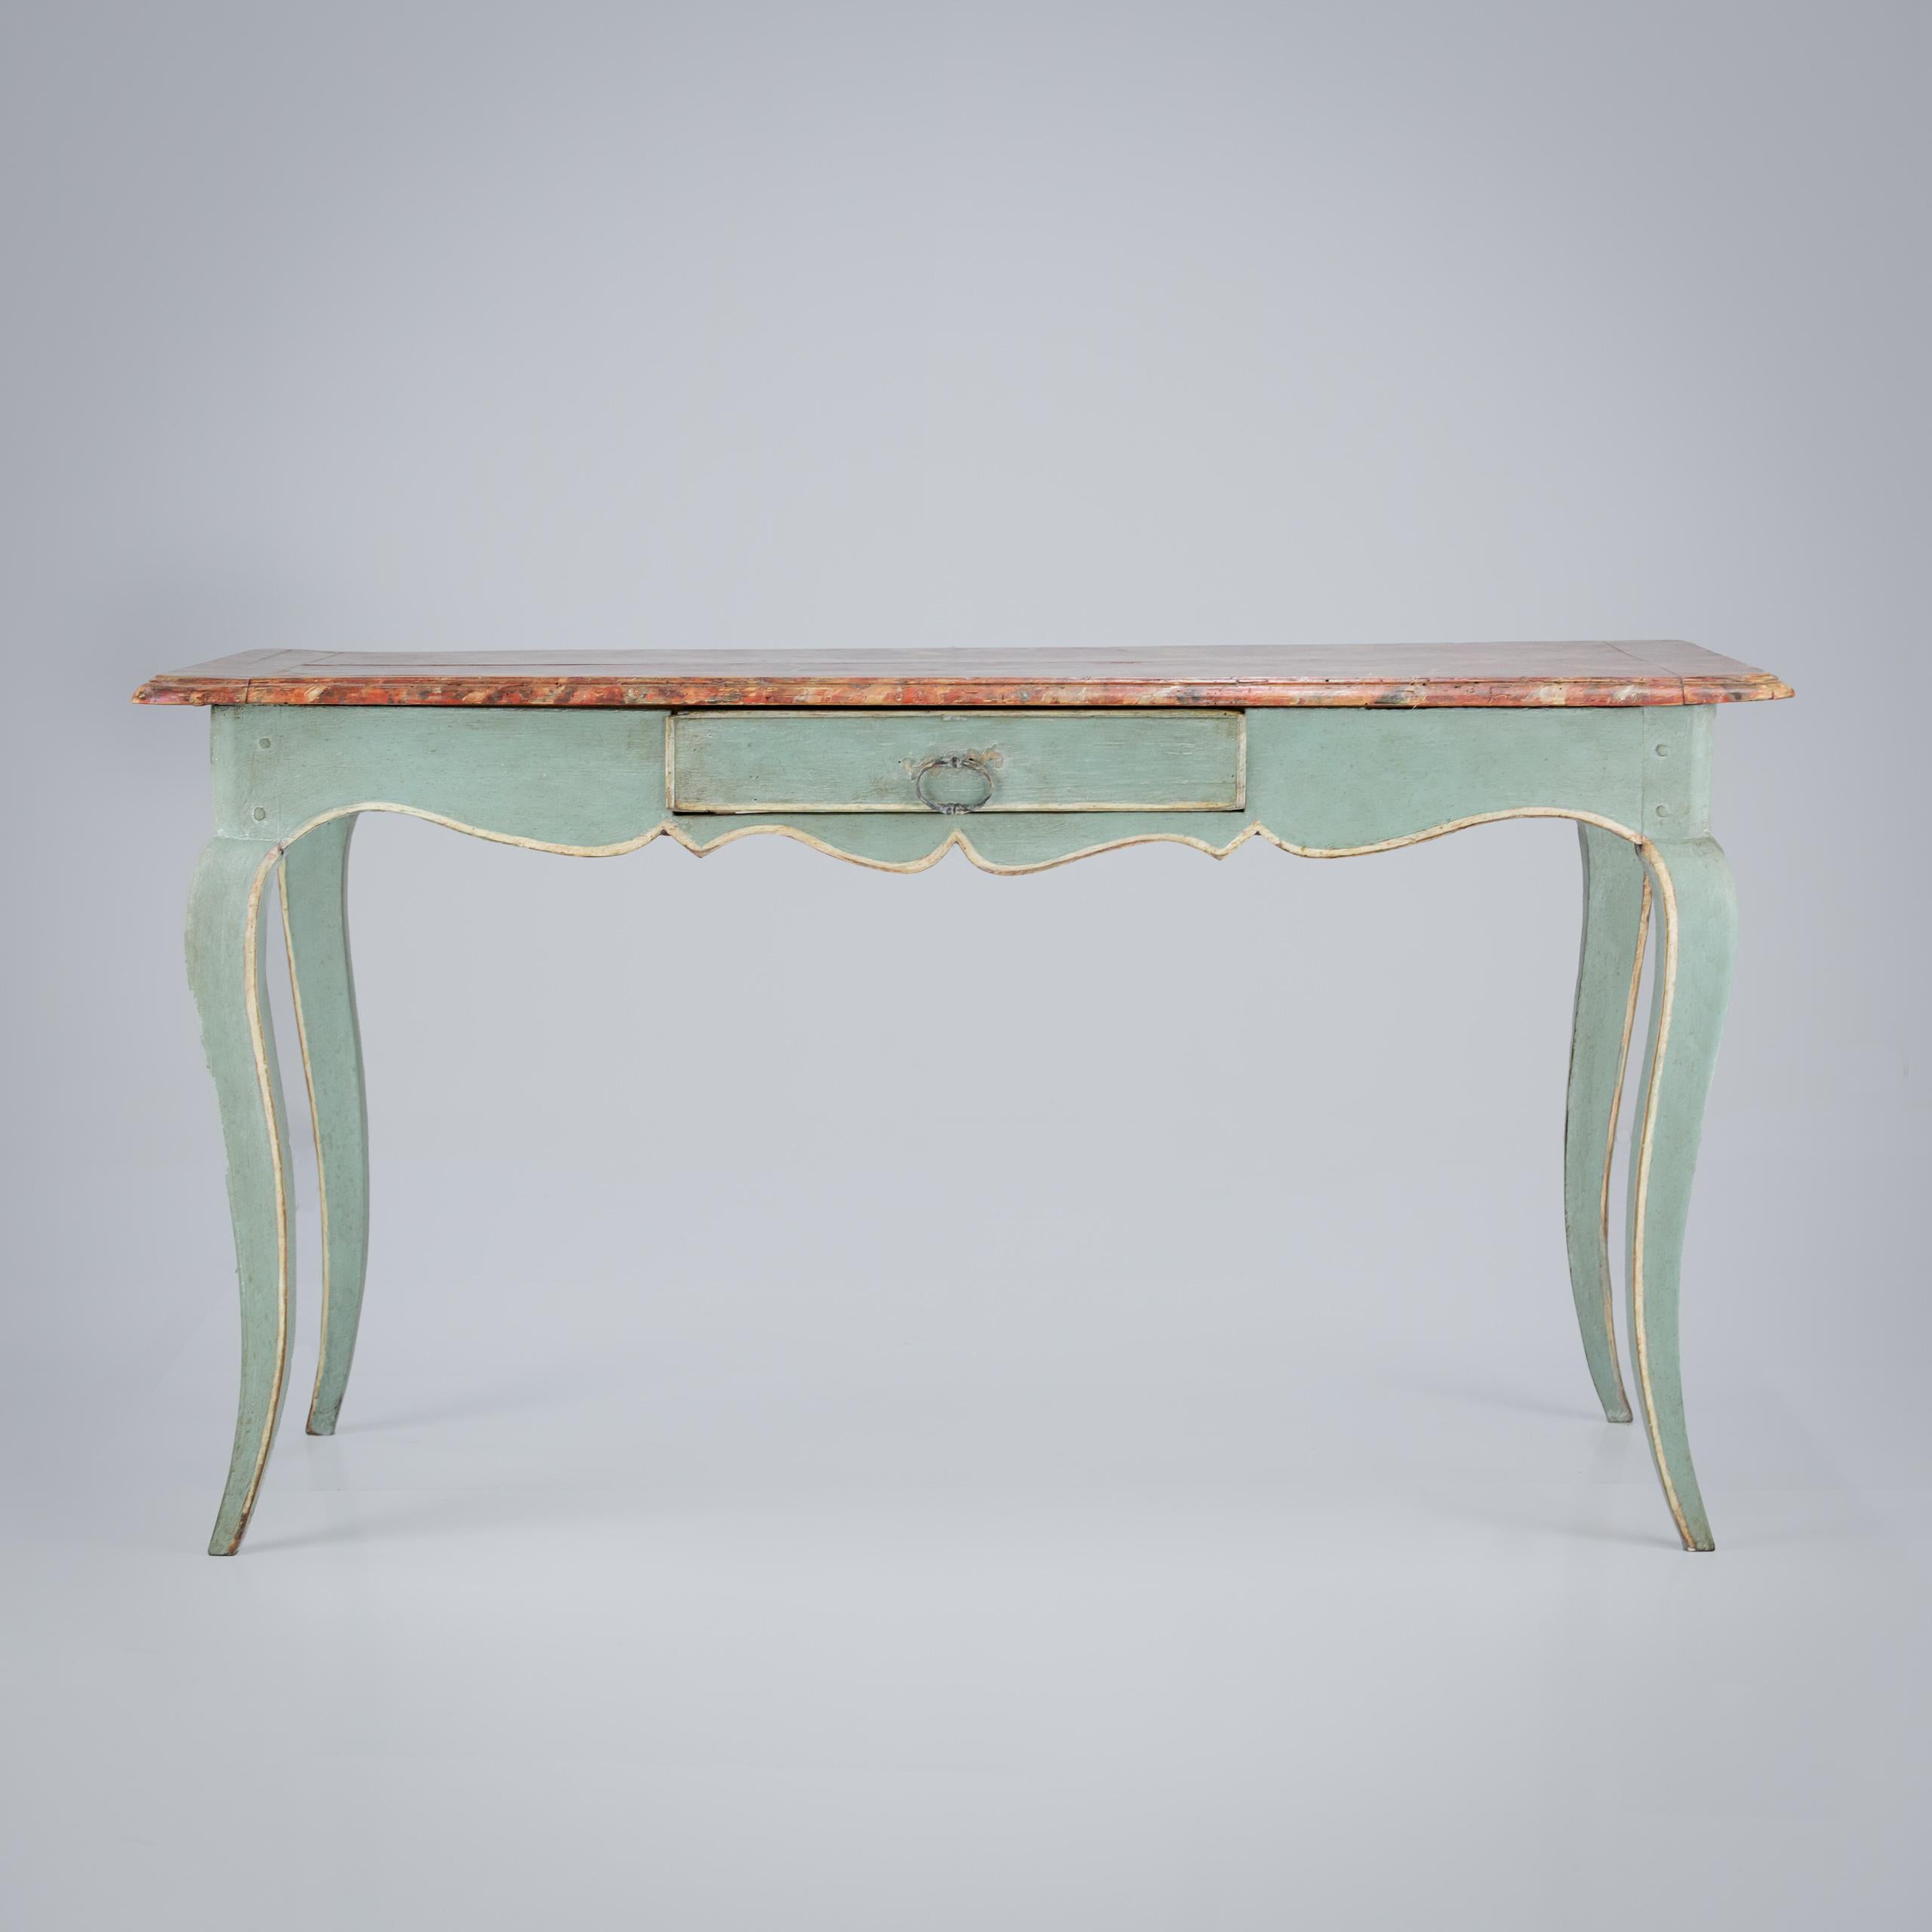 Painted Italian Desk, smart cabriole legs, extraordinary faux marble painted top, blue base. Later painted, recent refreshing and colour matching to the base although the impressive faux marble desk surface as found. Italy, Circa 1880.